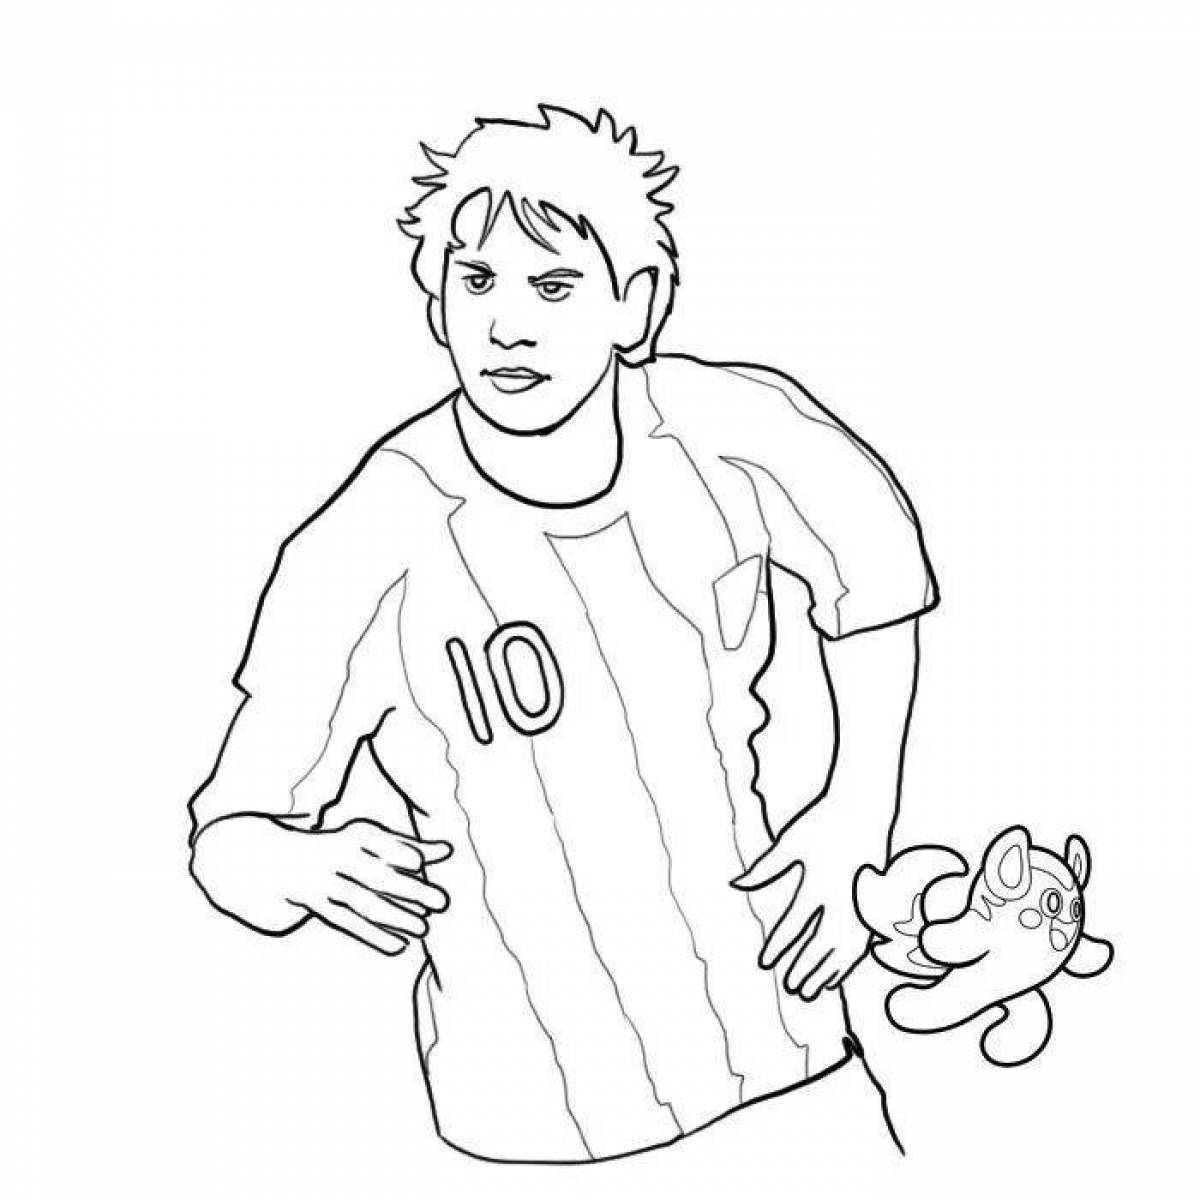 Coloring football player messi